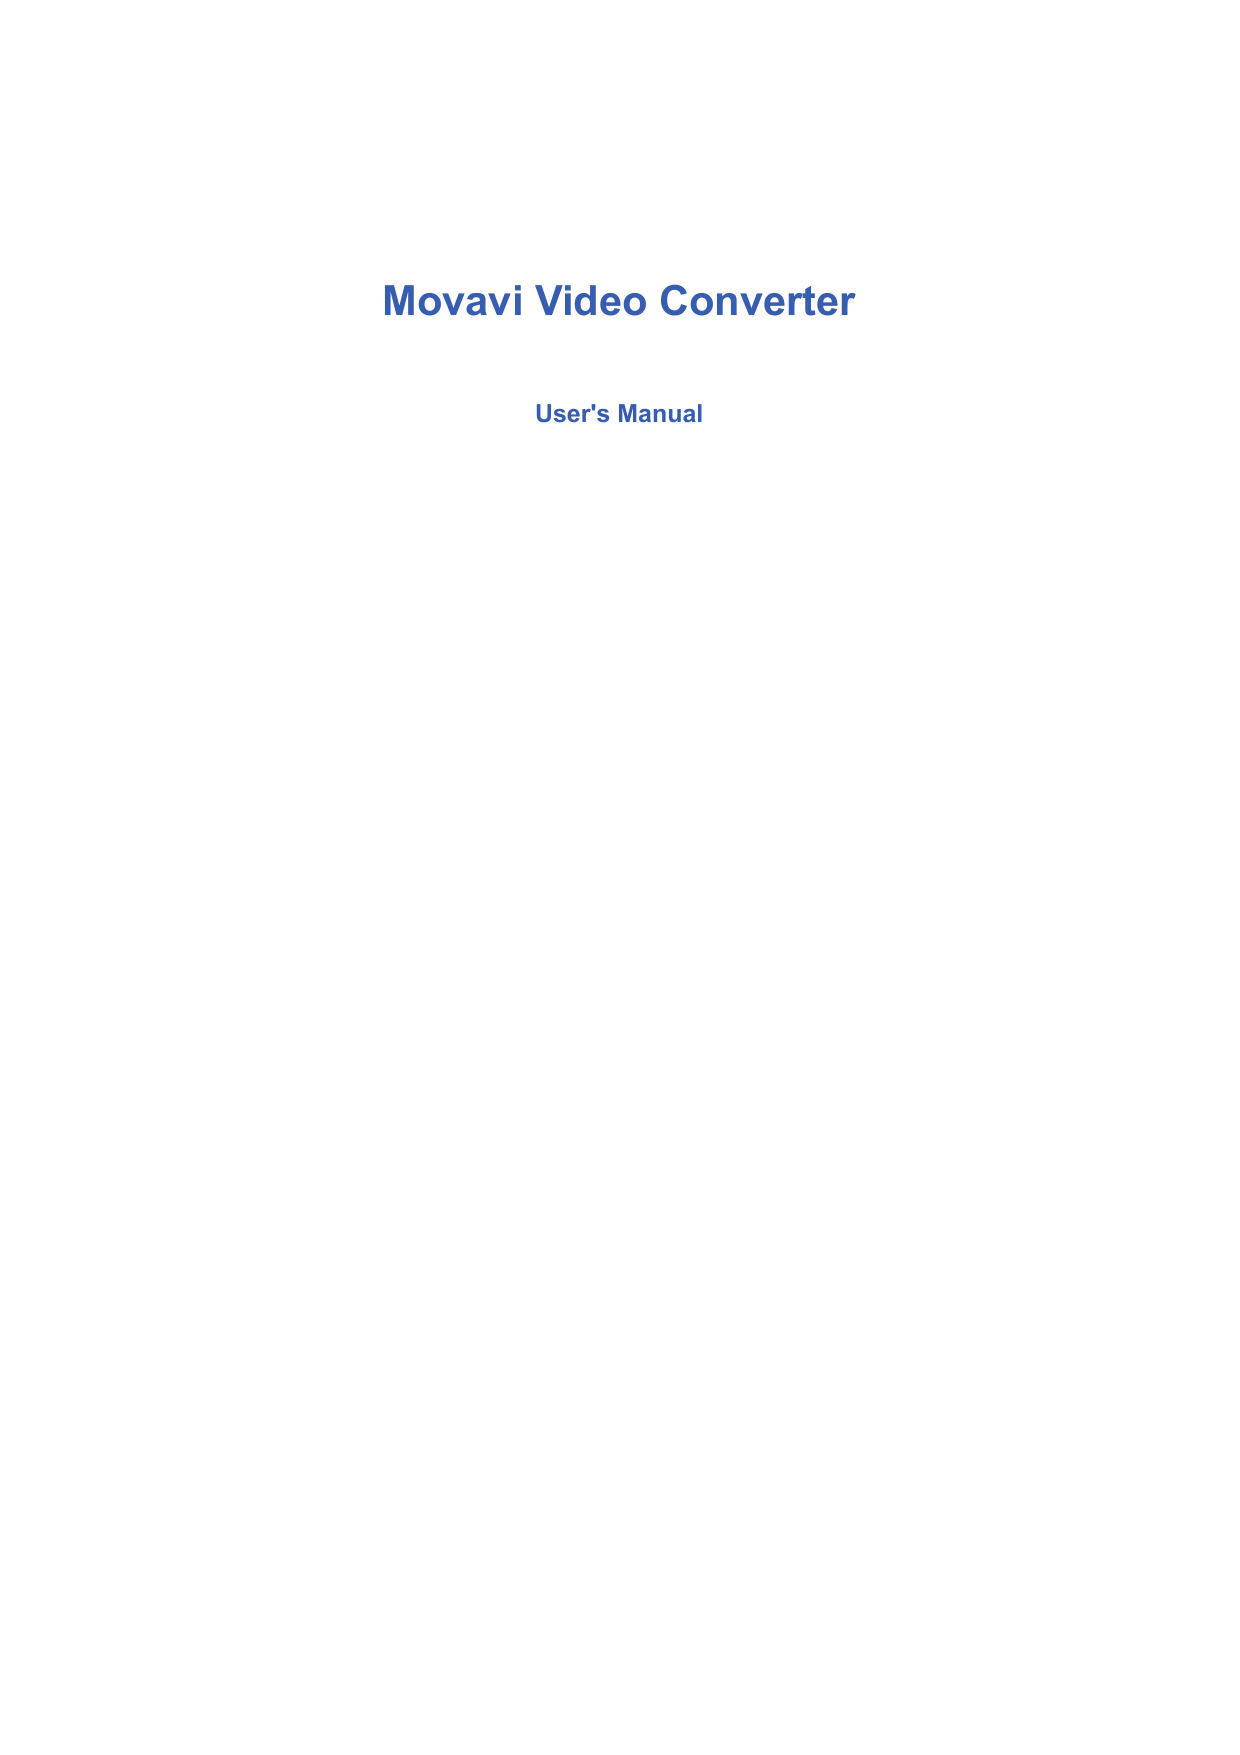 movavi video converter 15 only 6 minutes